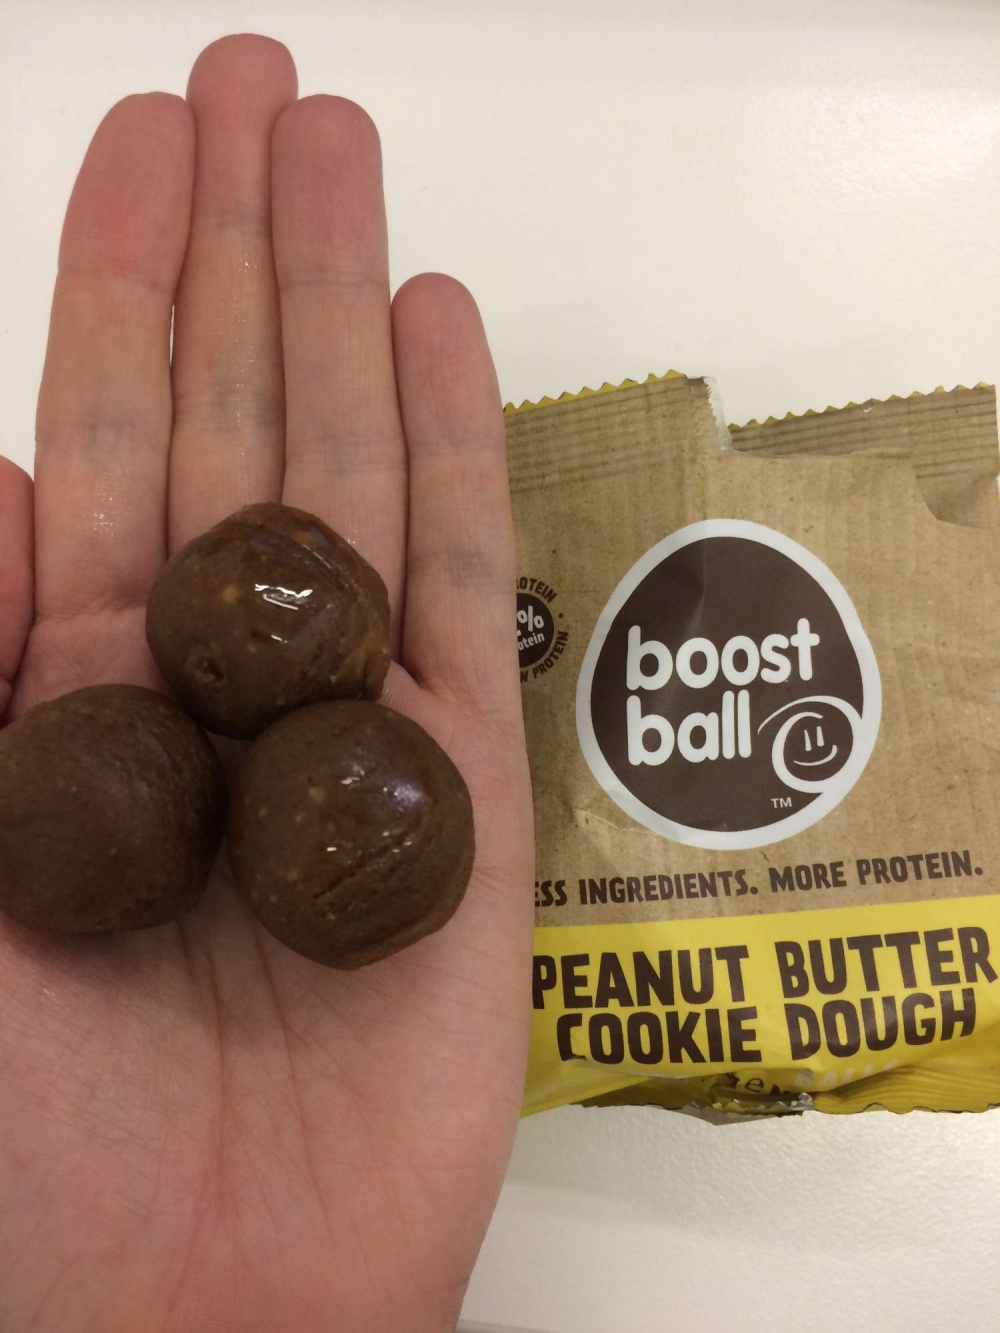 Boostball Peanut Btter Cookie Dough Review TheFuss.co.uk